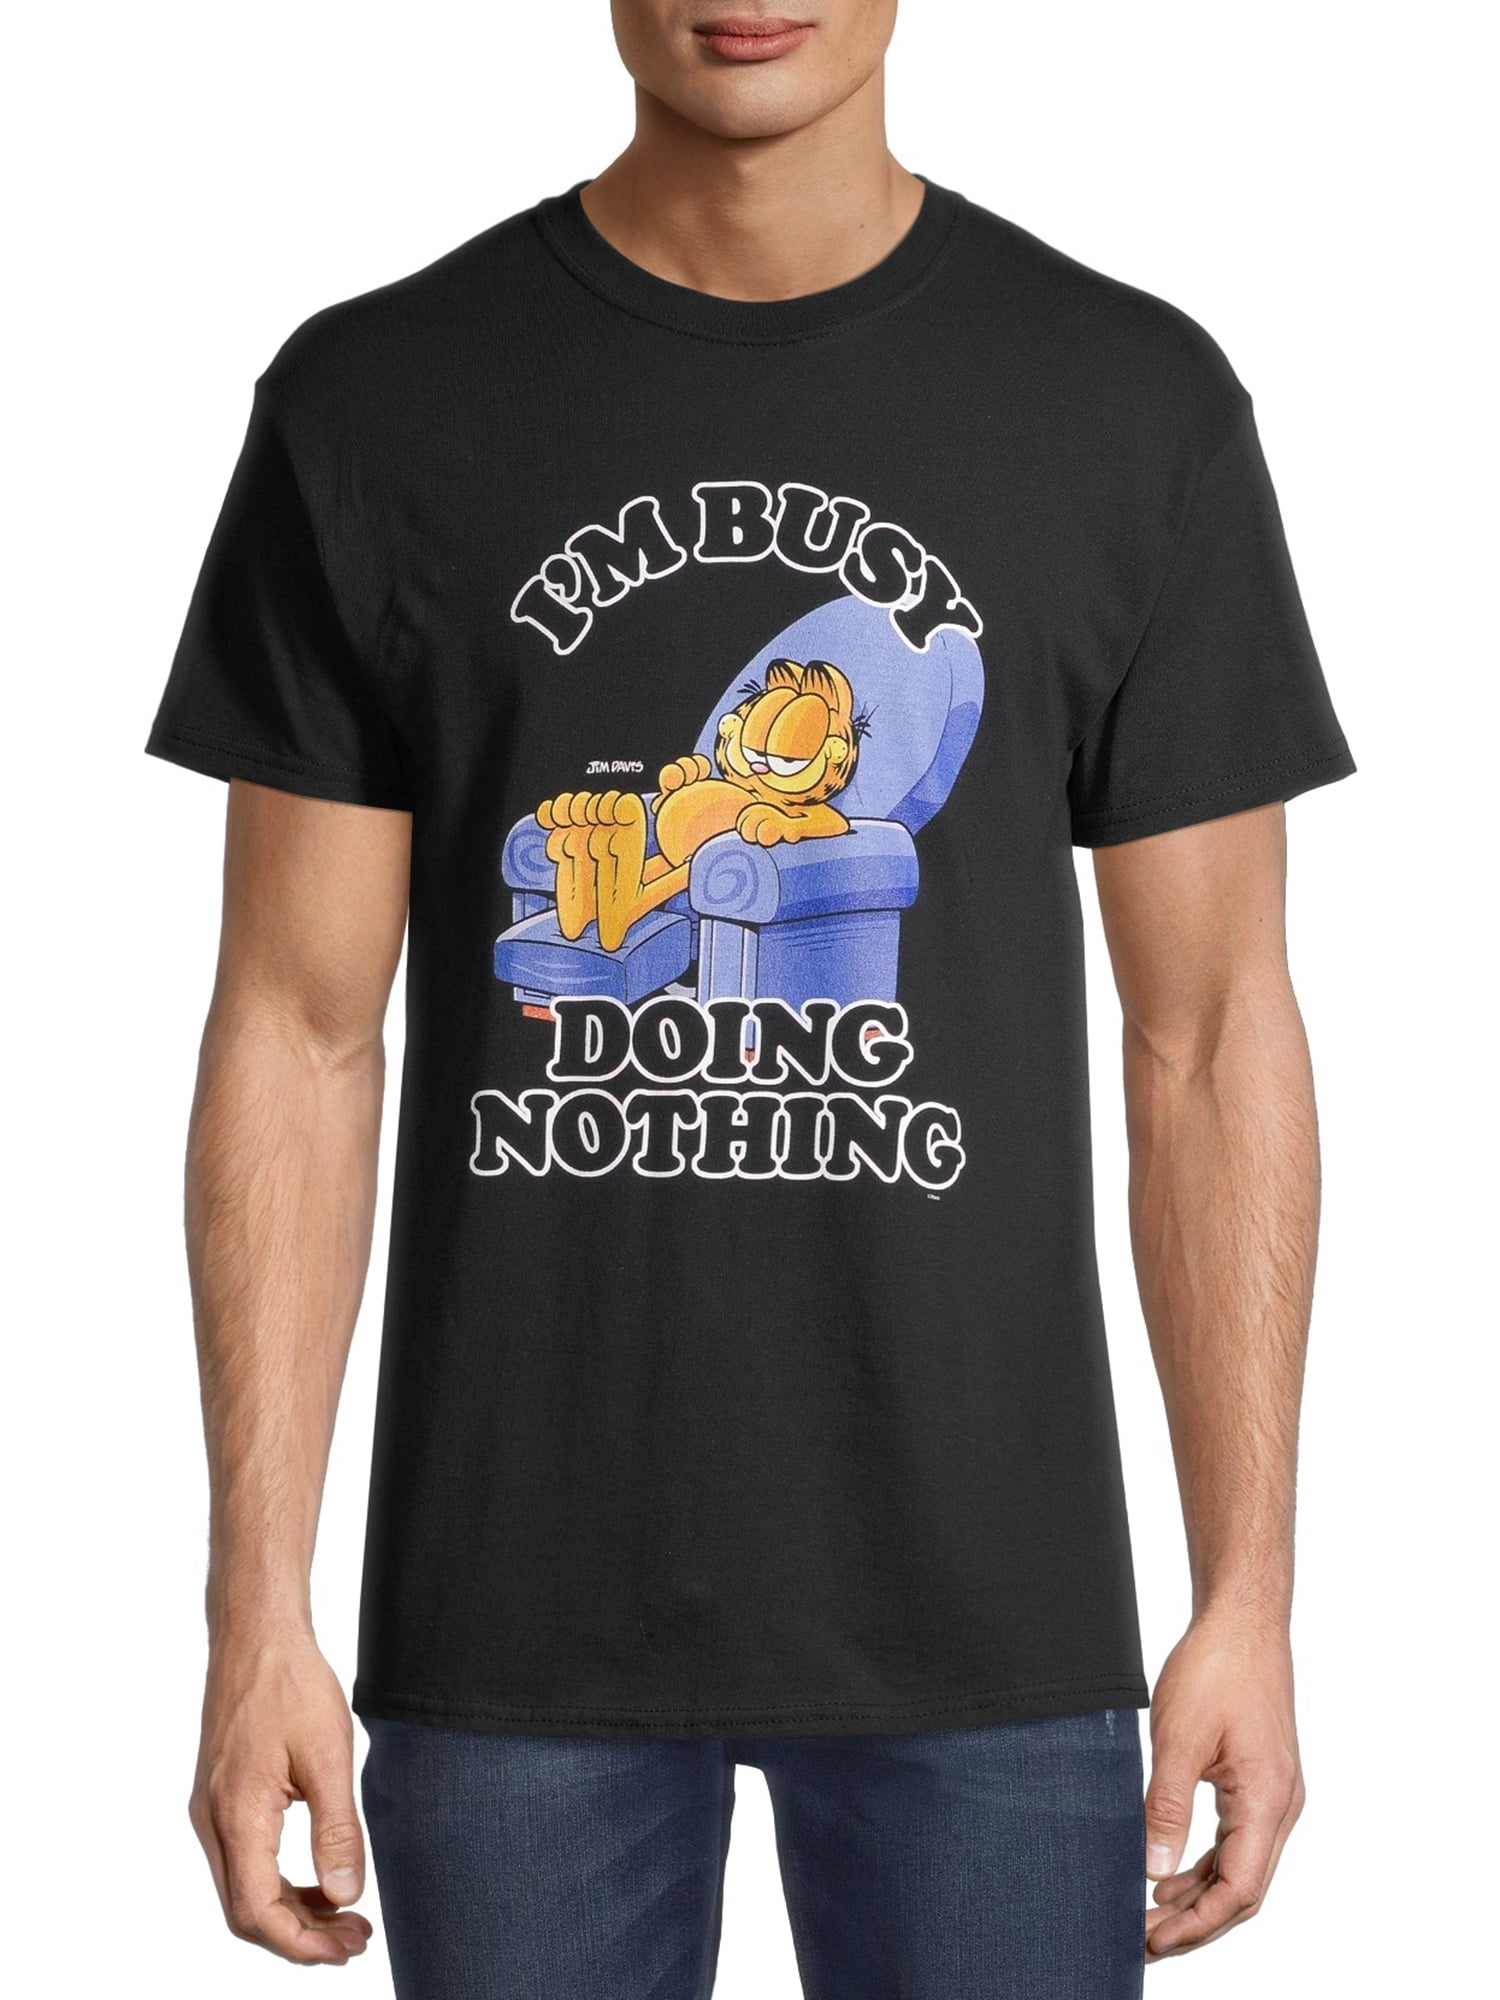 Garfield Waking Up Is Hard To Do T-Shirt Sizes S-3X NEW